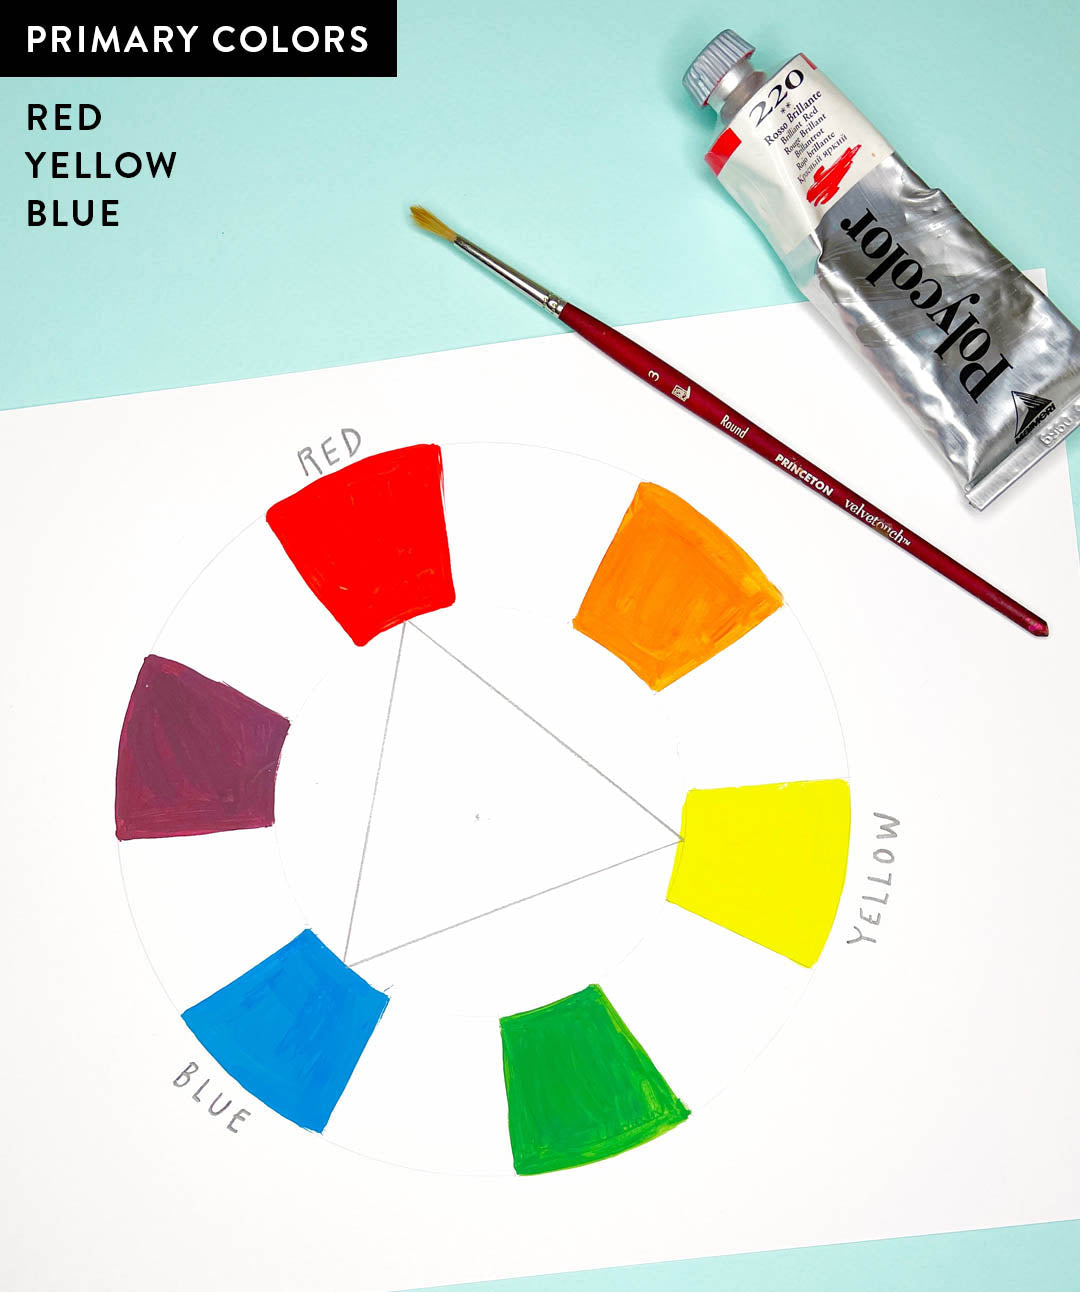 Color wheel with primary colors